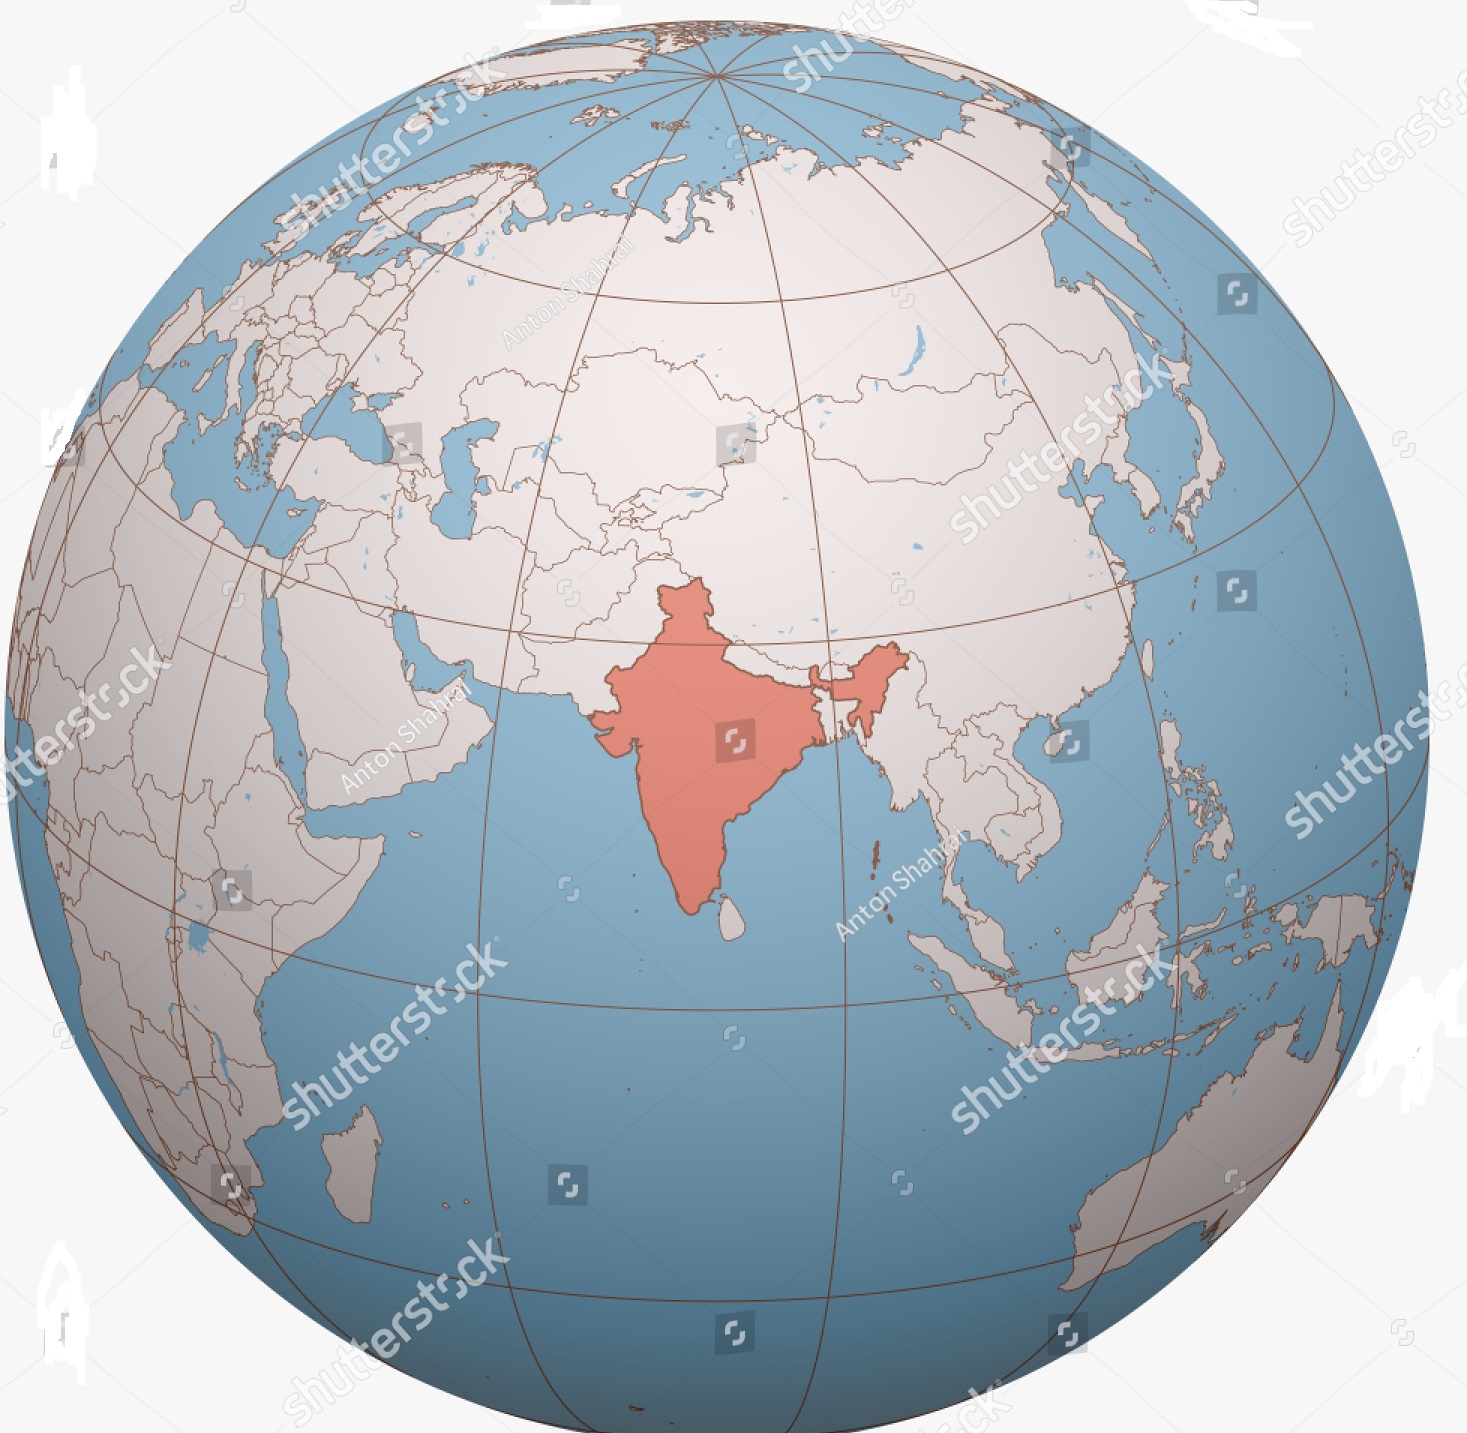 WBBSE Notes For Class 6 Physical Geography Chapter 10 India - Location ...